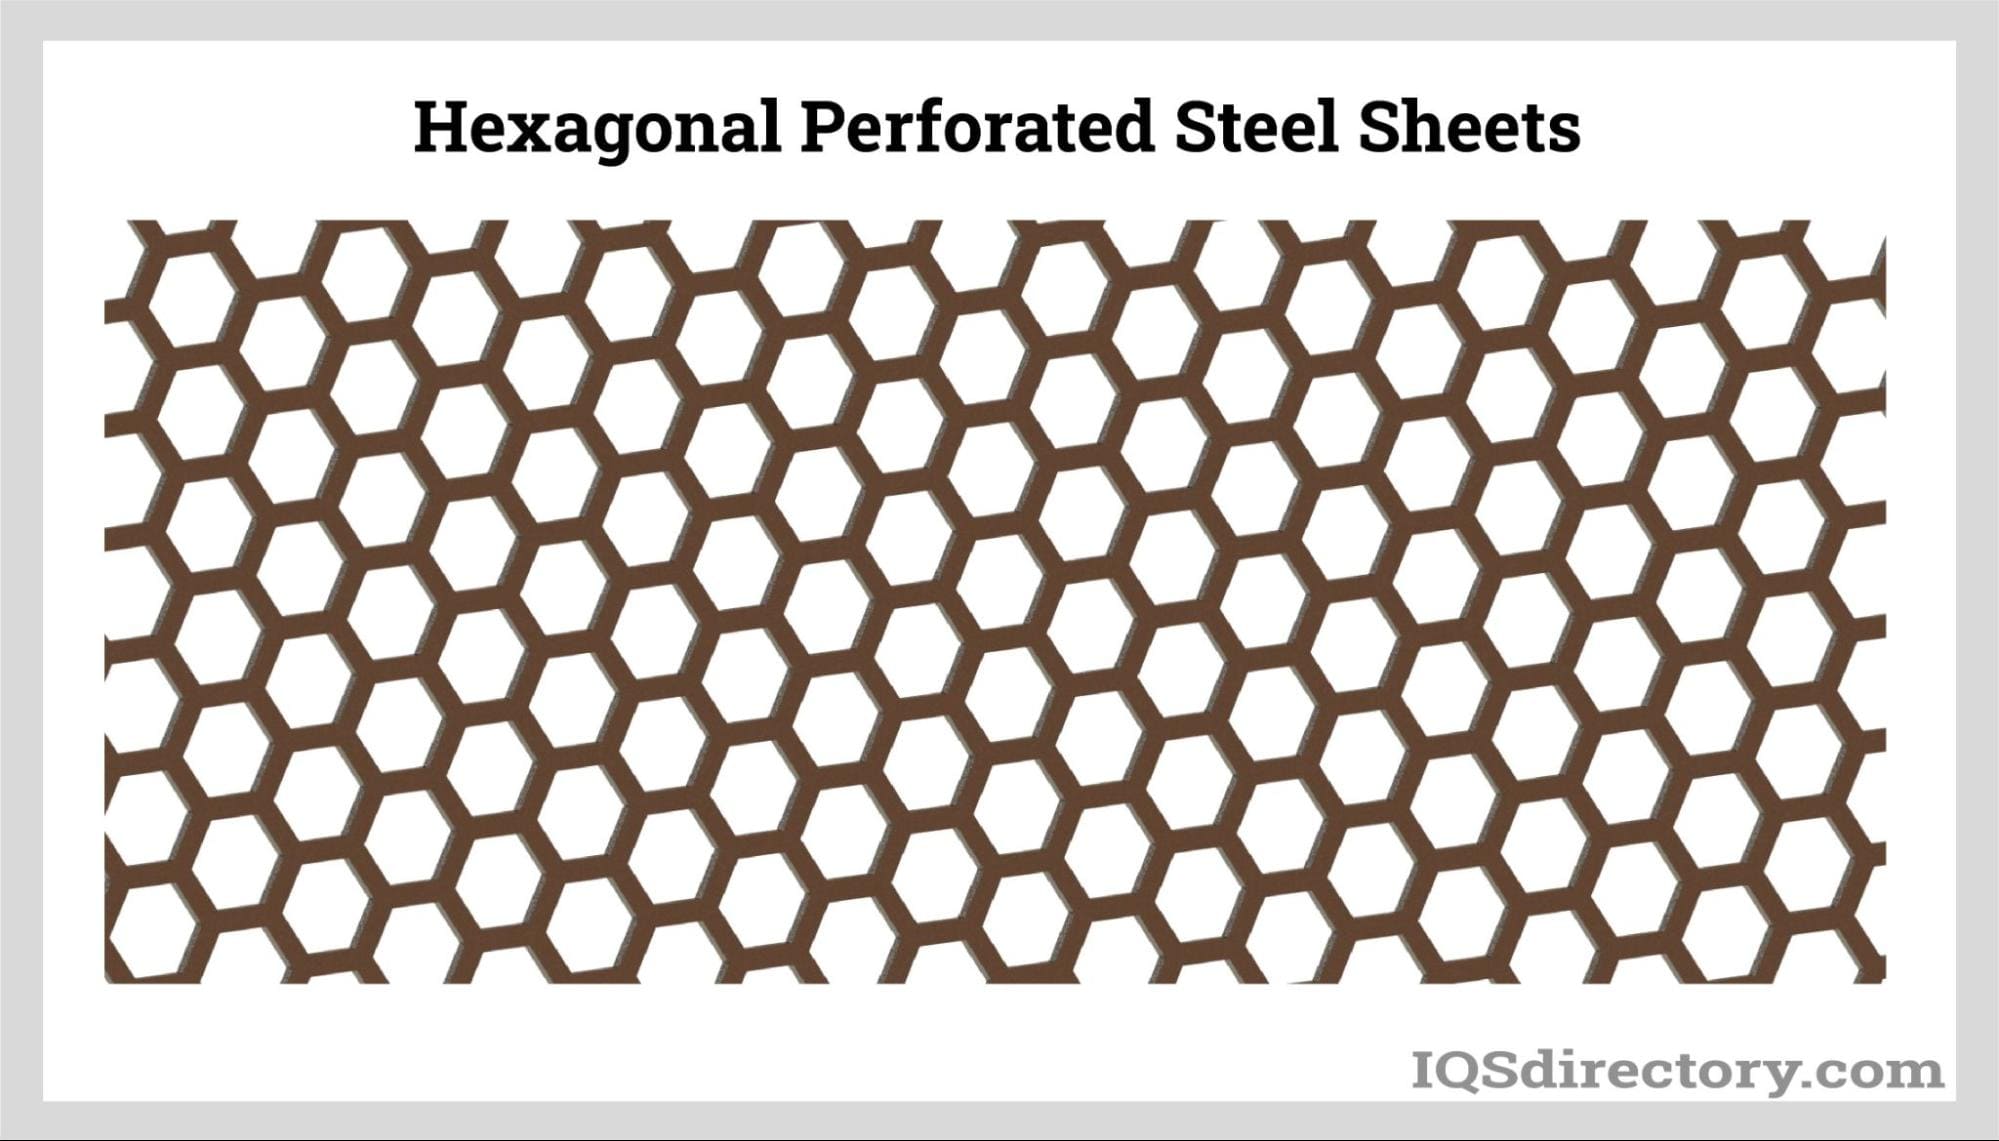 Hexagonal Perforated Steel Sheets